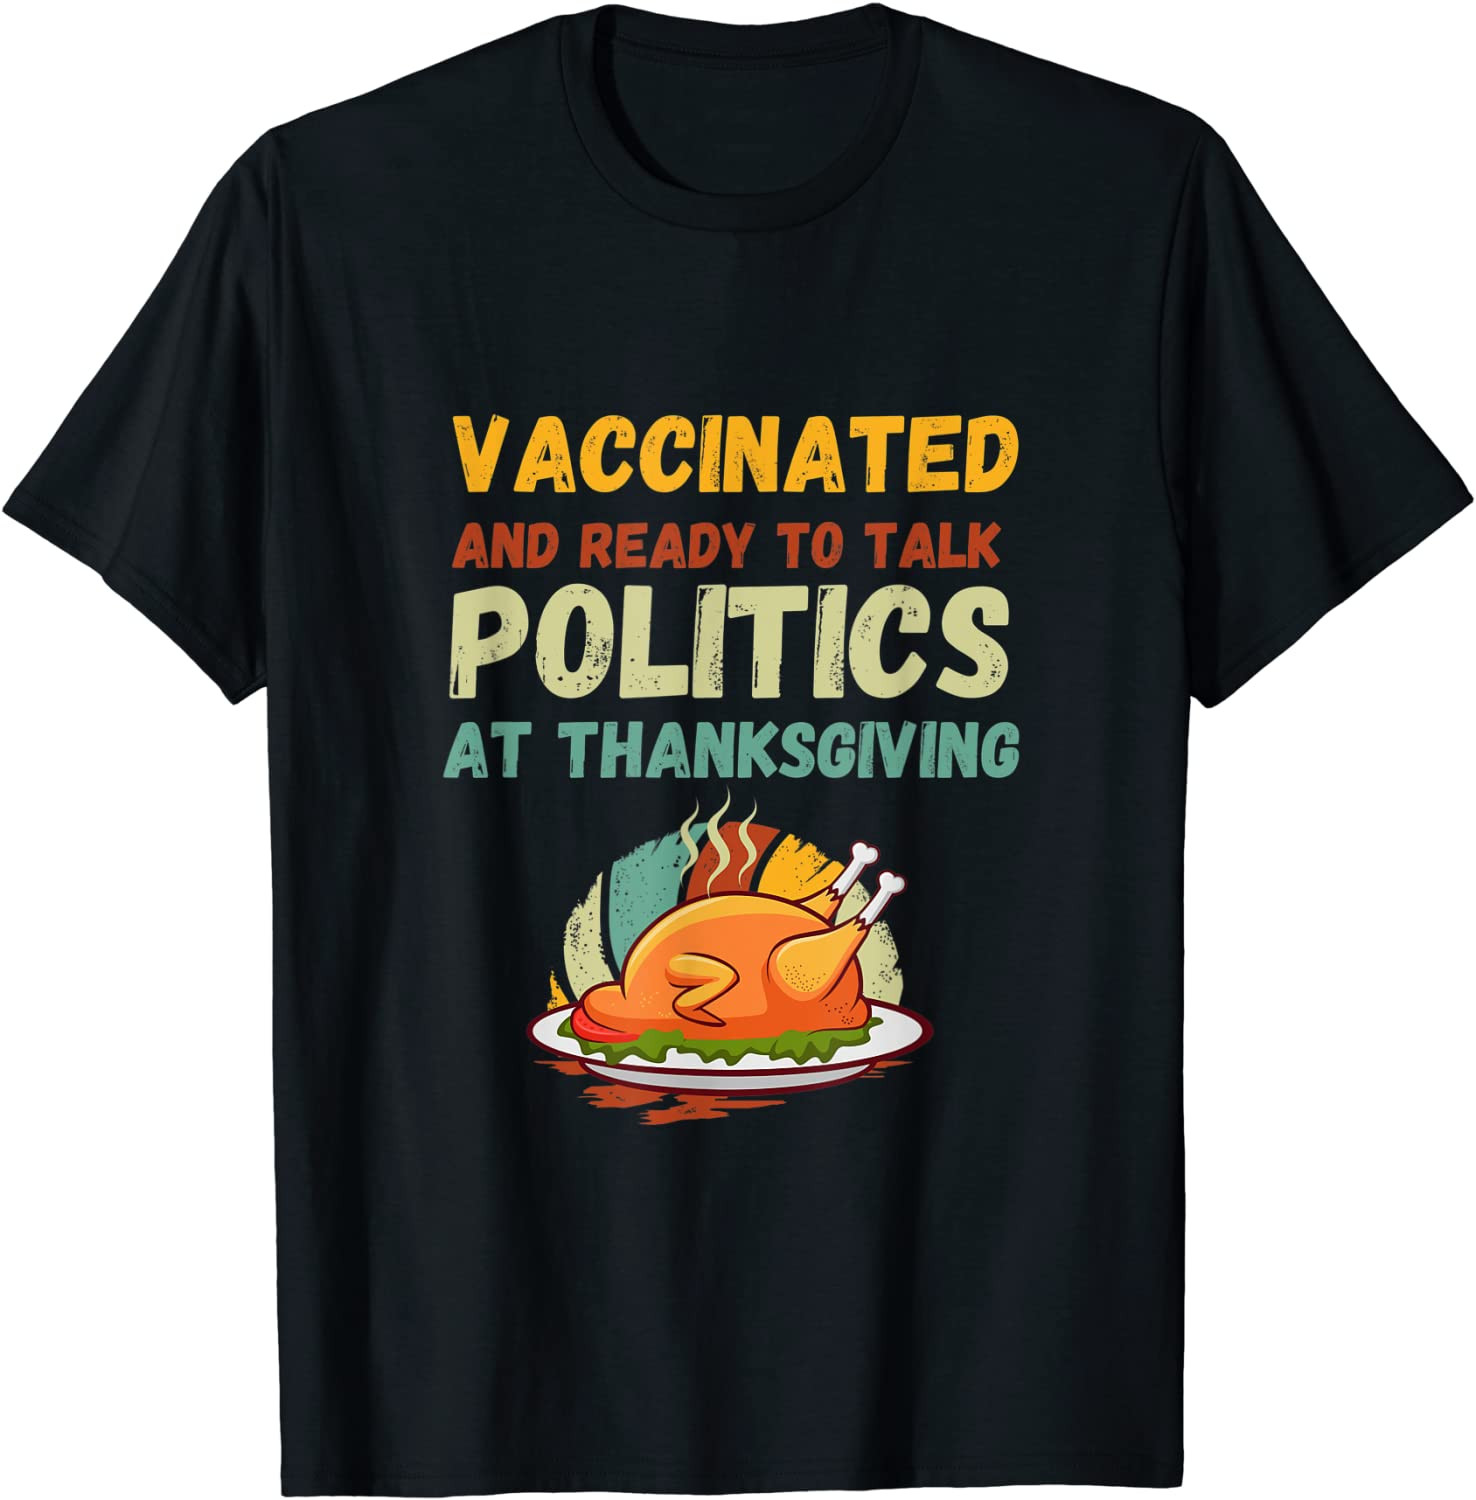 Vaccinated And Ready To Talk Politics At Thanksgiving T-Shirt